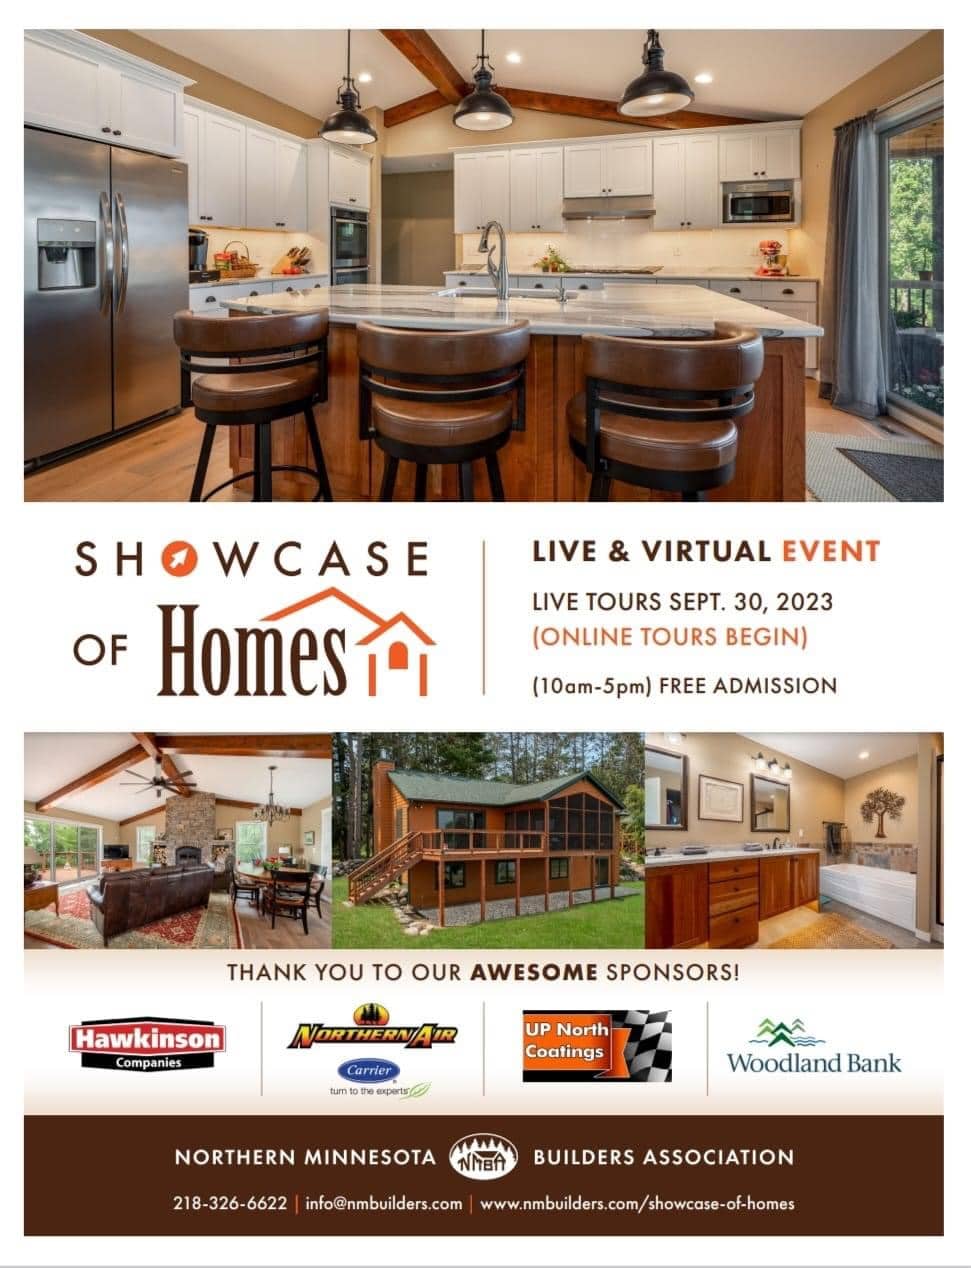 2023 Showcase Of Homes Event Visit